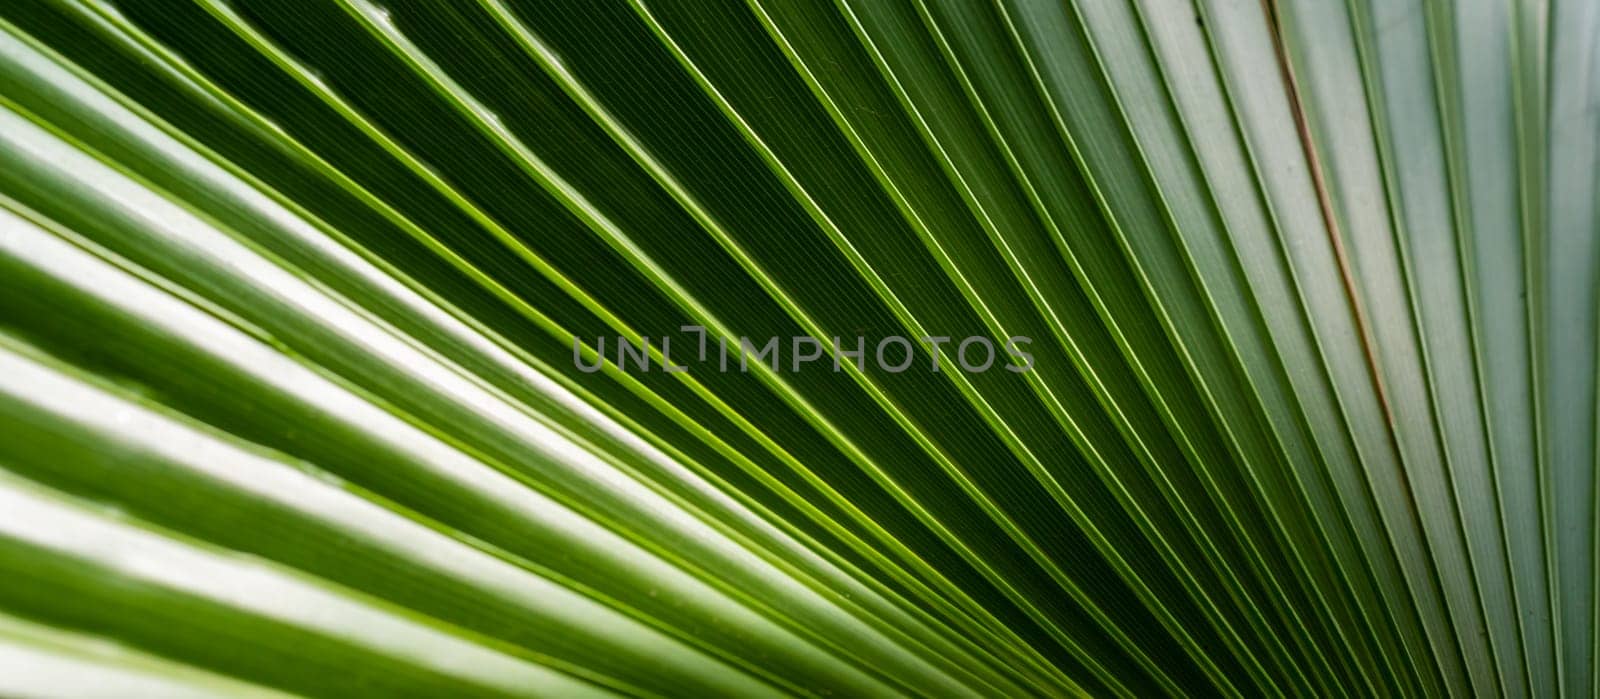 The play of light and shadows, the texture of straight lines near the green palm leaf by Hydrobiolog